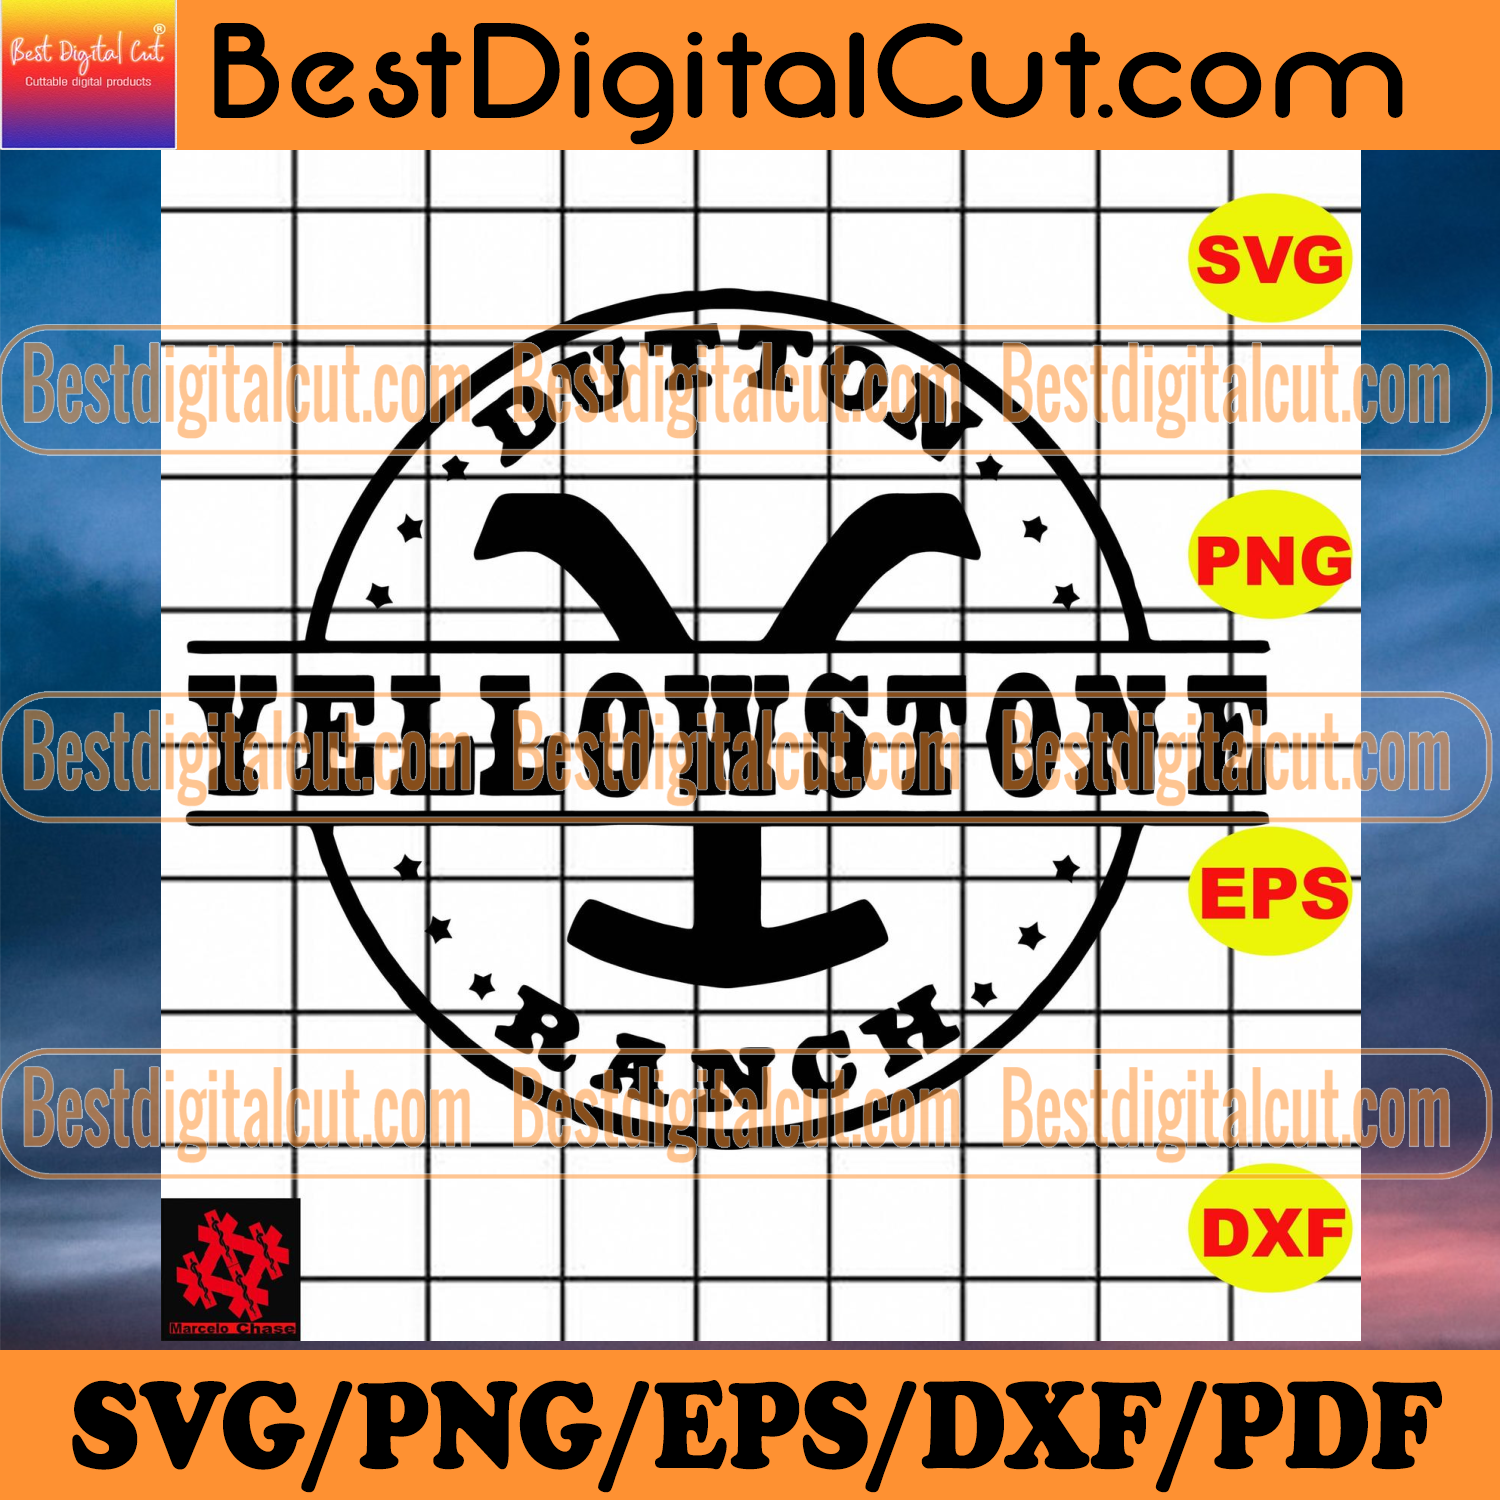 Download Dutton Yellowstone Ranch Trending Svg Yellowstone Svg Yellowstone Series Dutton Family Svg Tv Series Svg John Dutton American Tv Series Svg Love Tv Series John Dutton Shirt John Dutton Gift Yellowstone Shirt PSD Mockup Templates